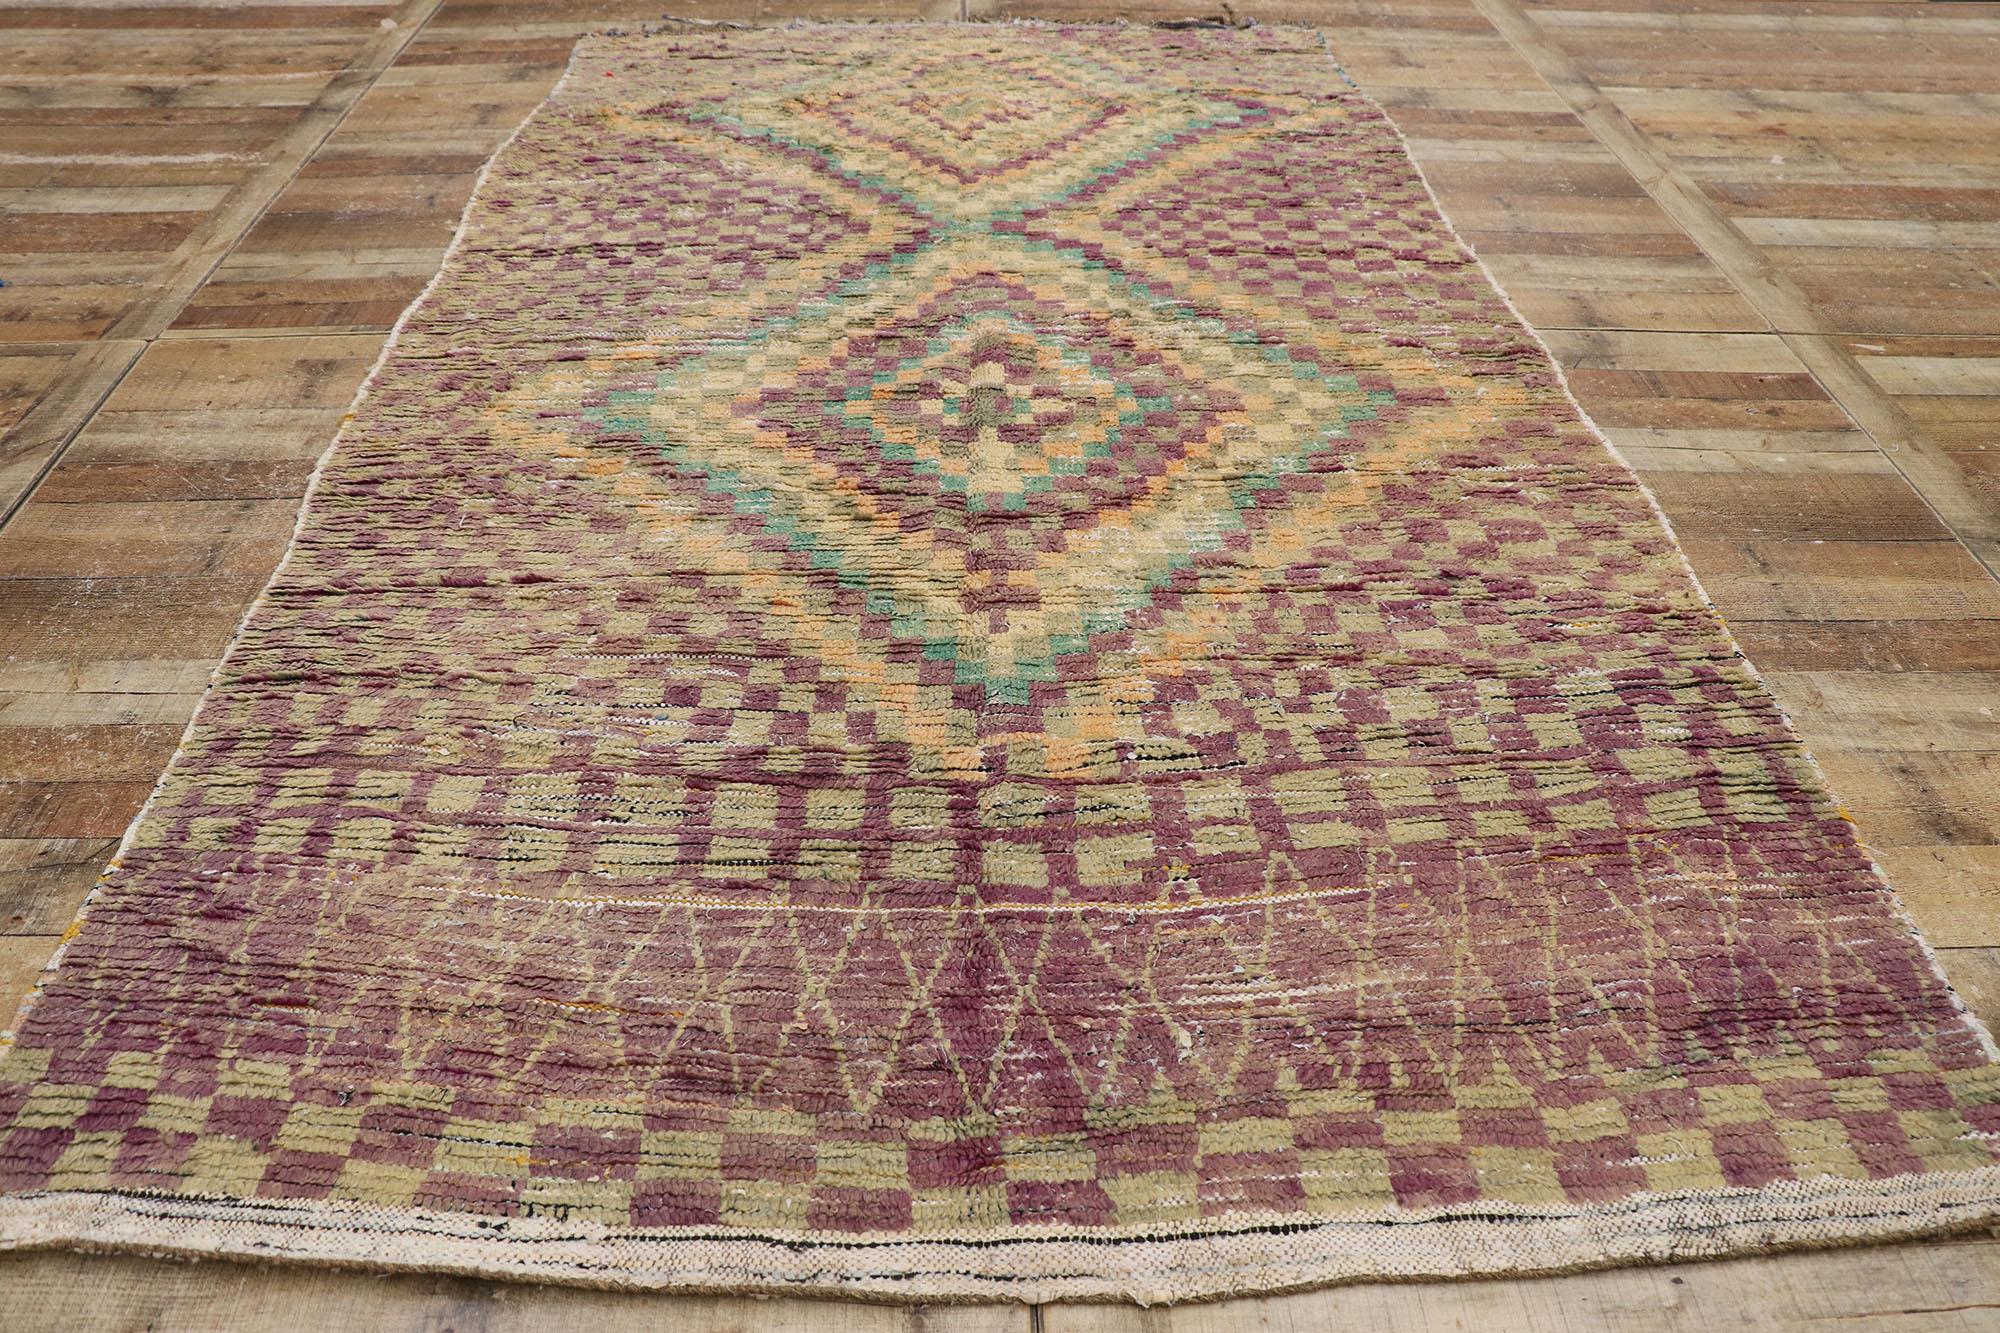 Rustic Boho Chic Style Vintage Moroccan Rug by Berber Tribes of Morocco For Sale 1